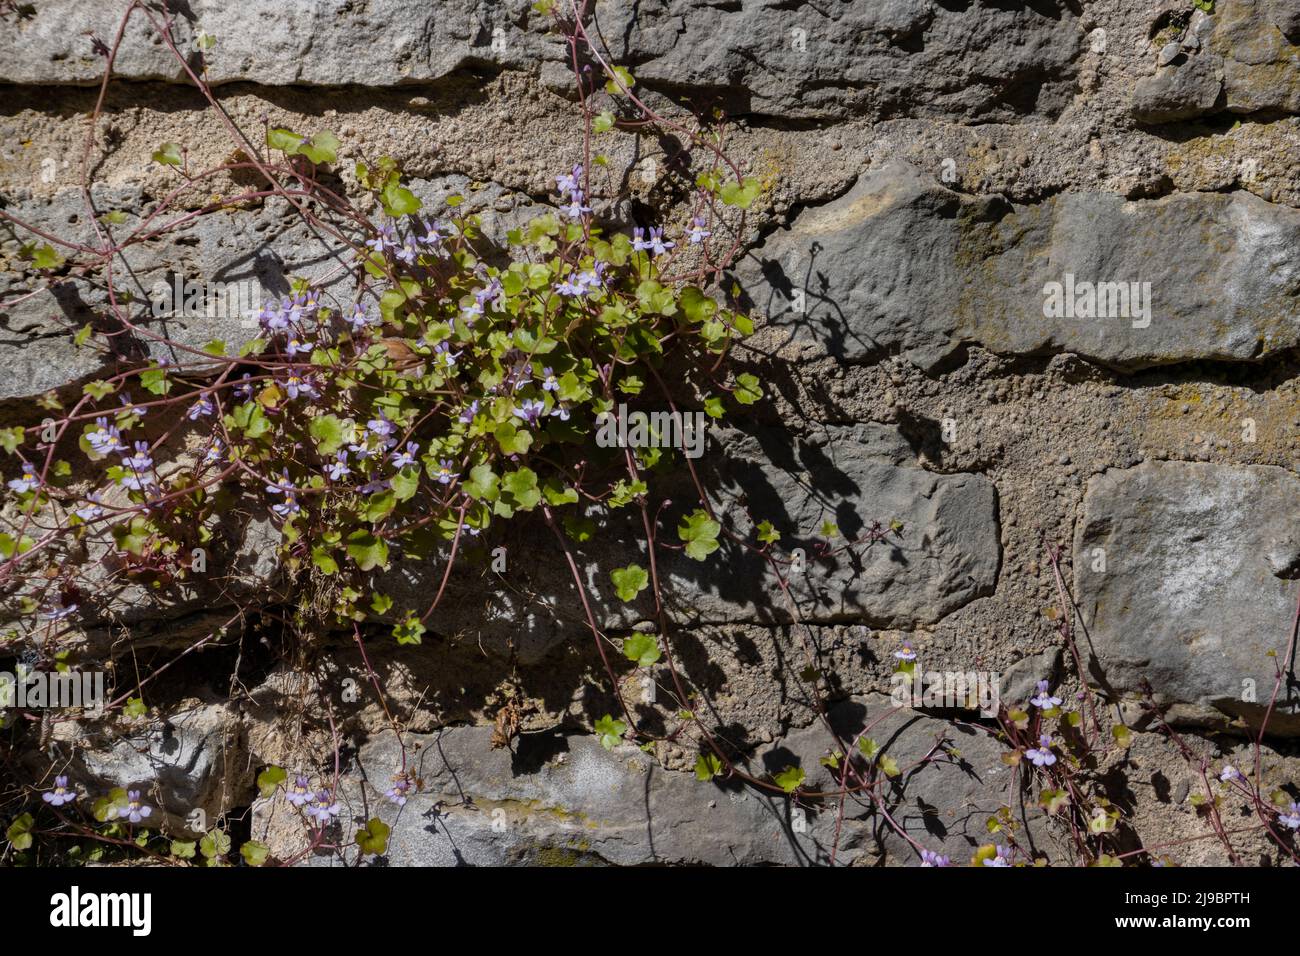 Cymbalaria muralis growing on a natural stone wall, common names are also Coliseum Ivy, Pennywort, Kenilworth Ivy or Zimbelkraut Stock Photo